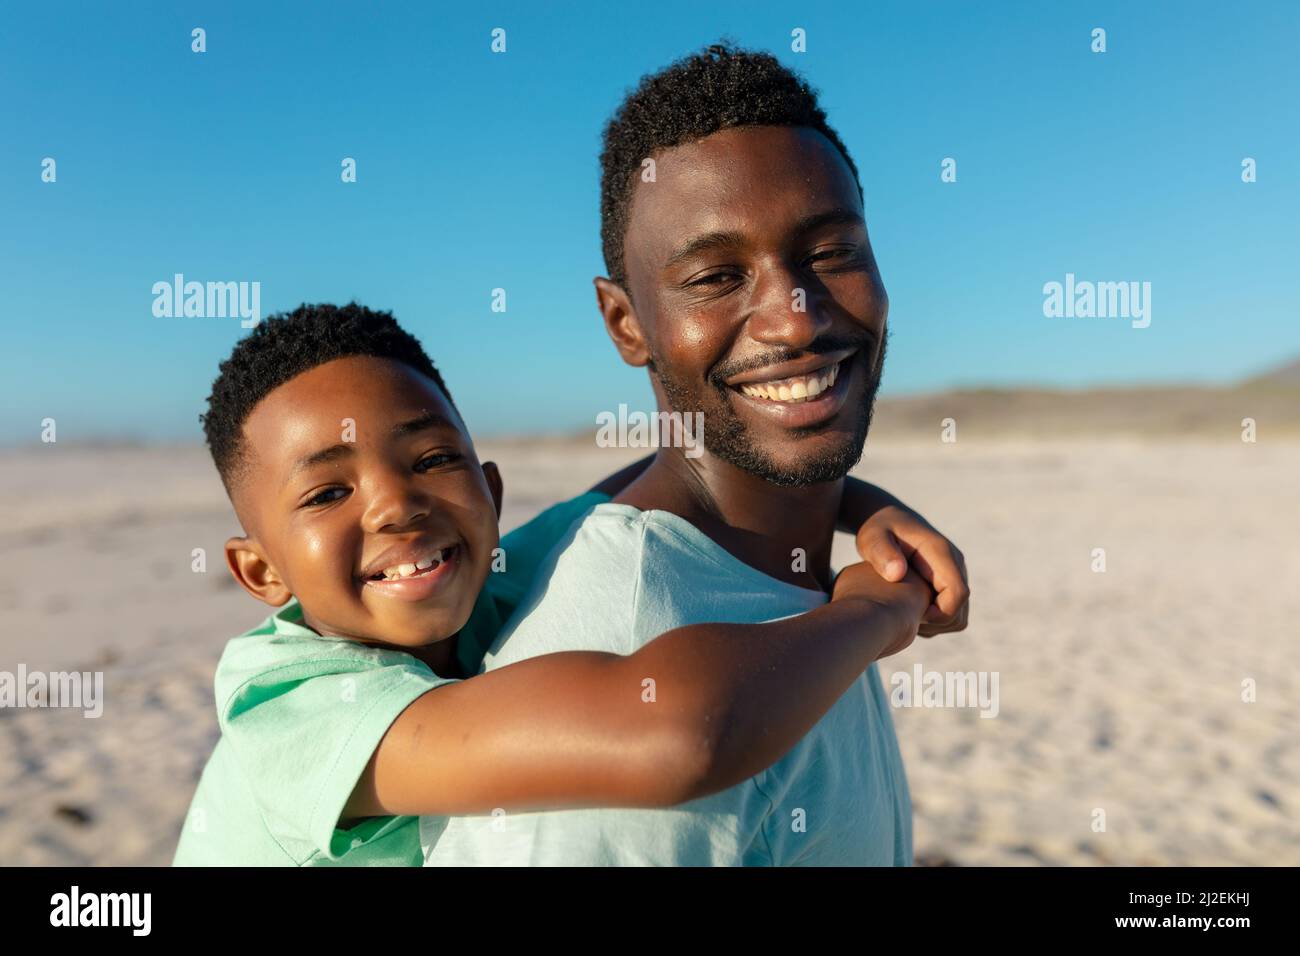 Side view of portrait of smiling african american father piggybacking son at beach on sunny day Stock Photo